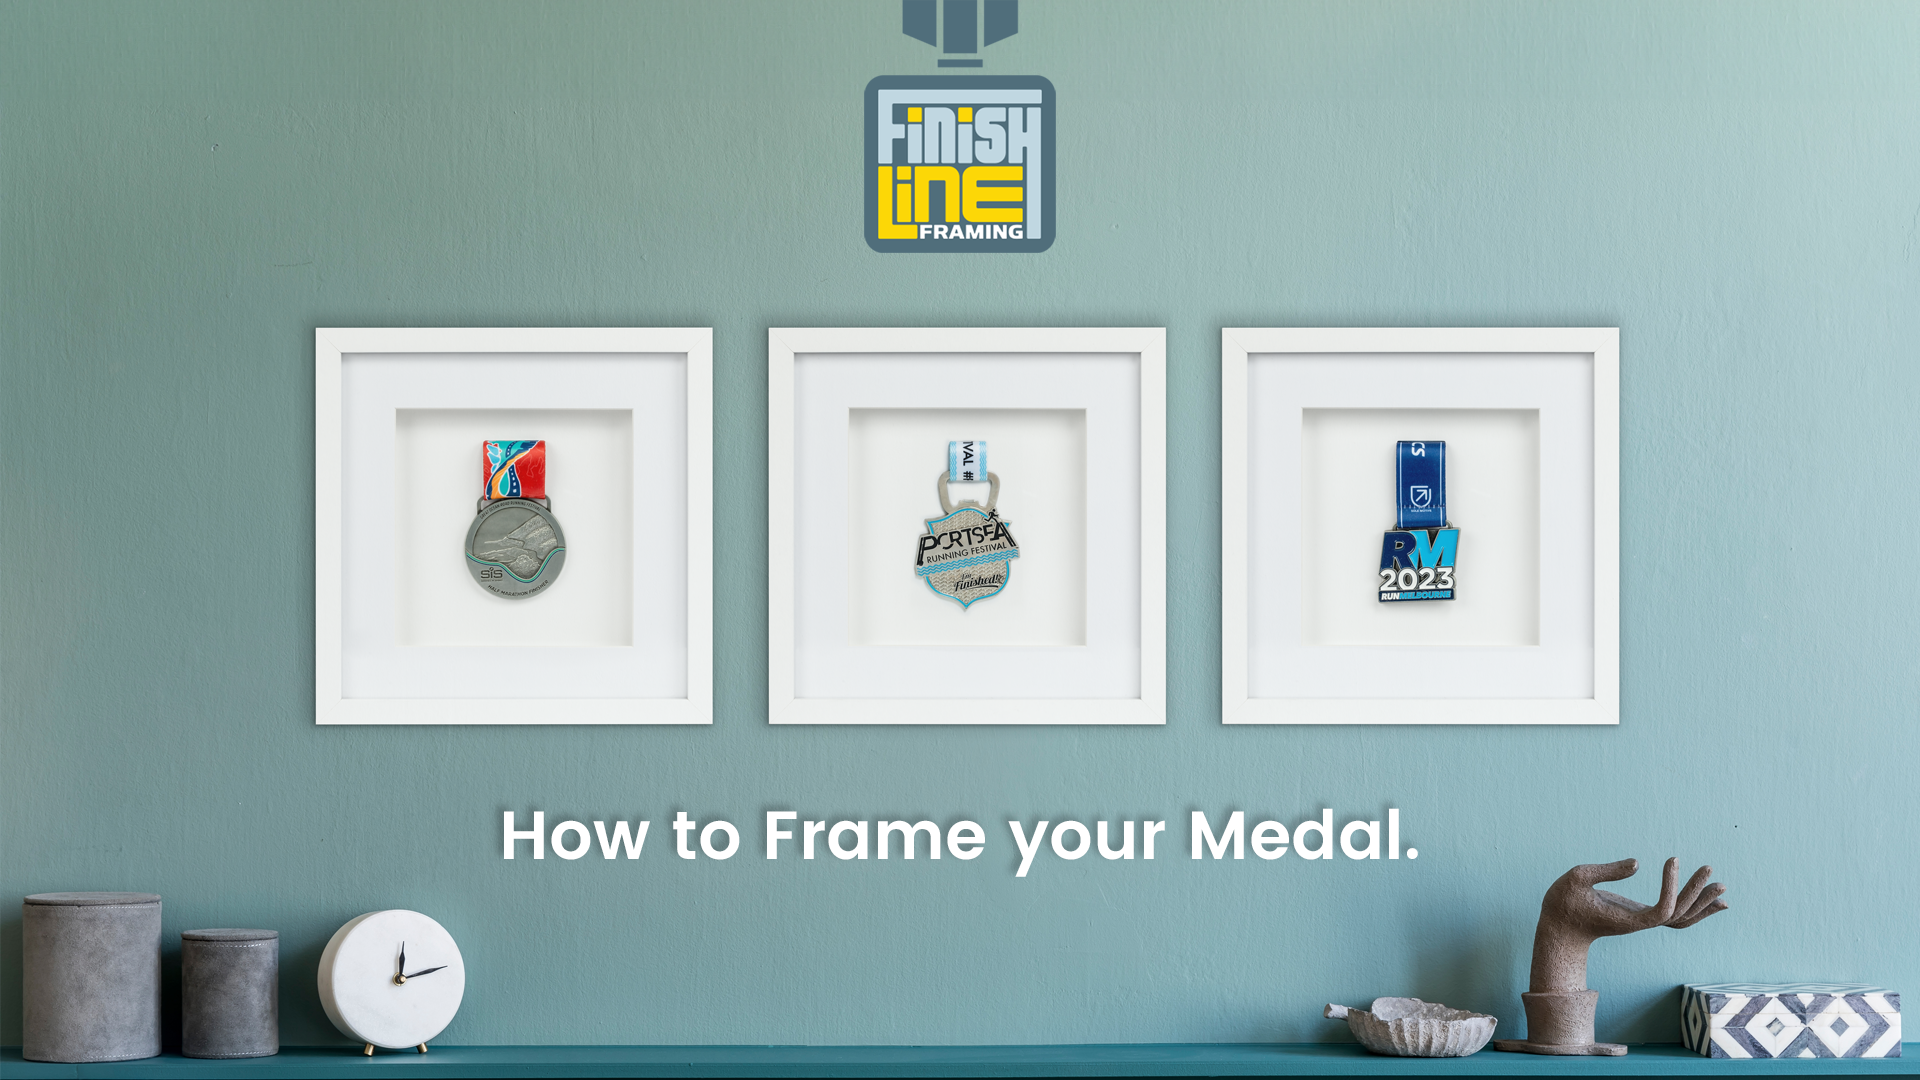 Load video: Video on how to frame your medal